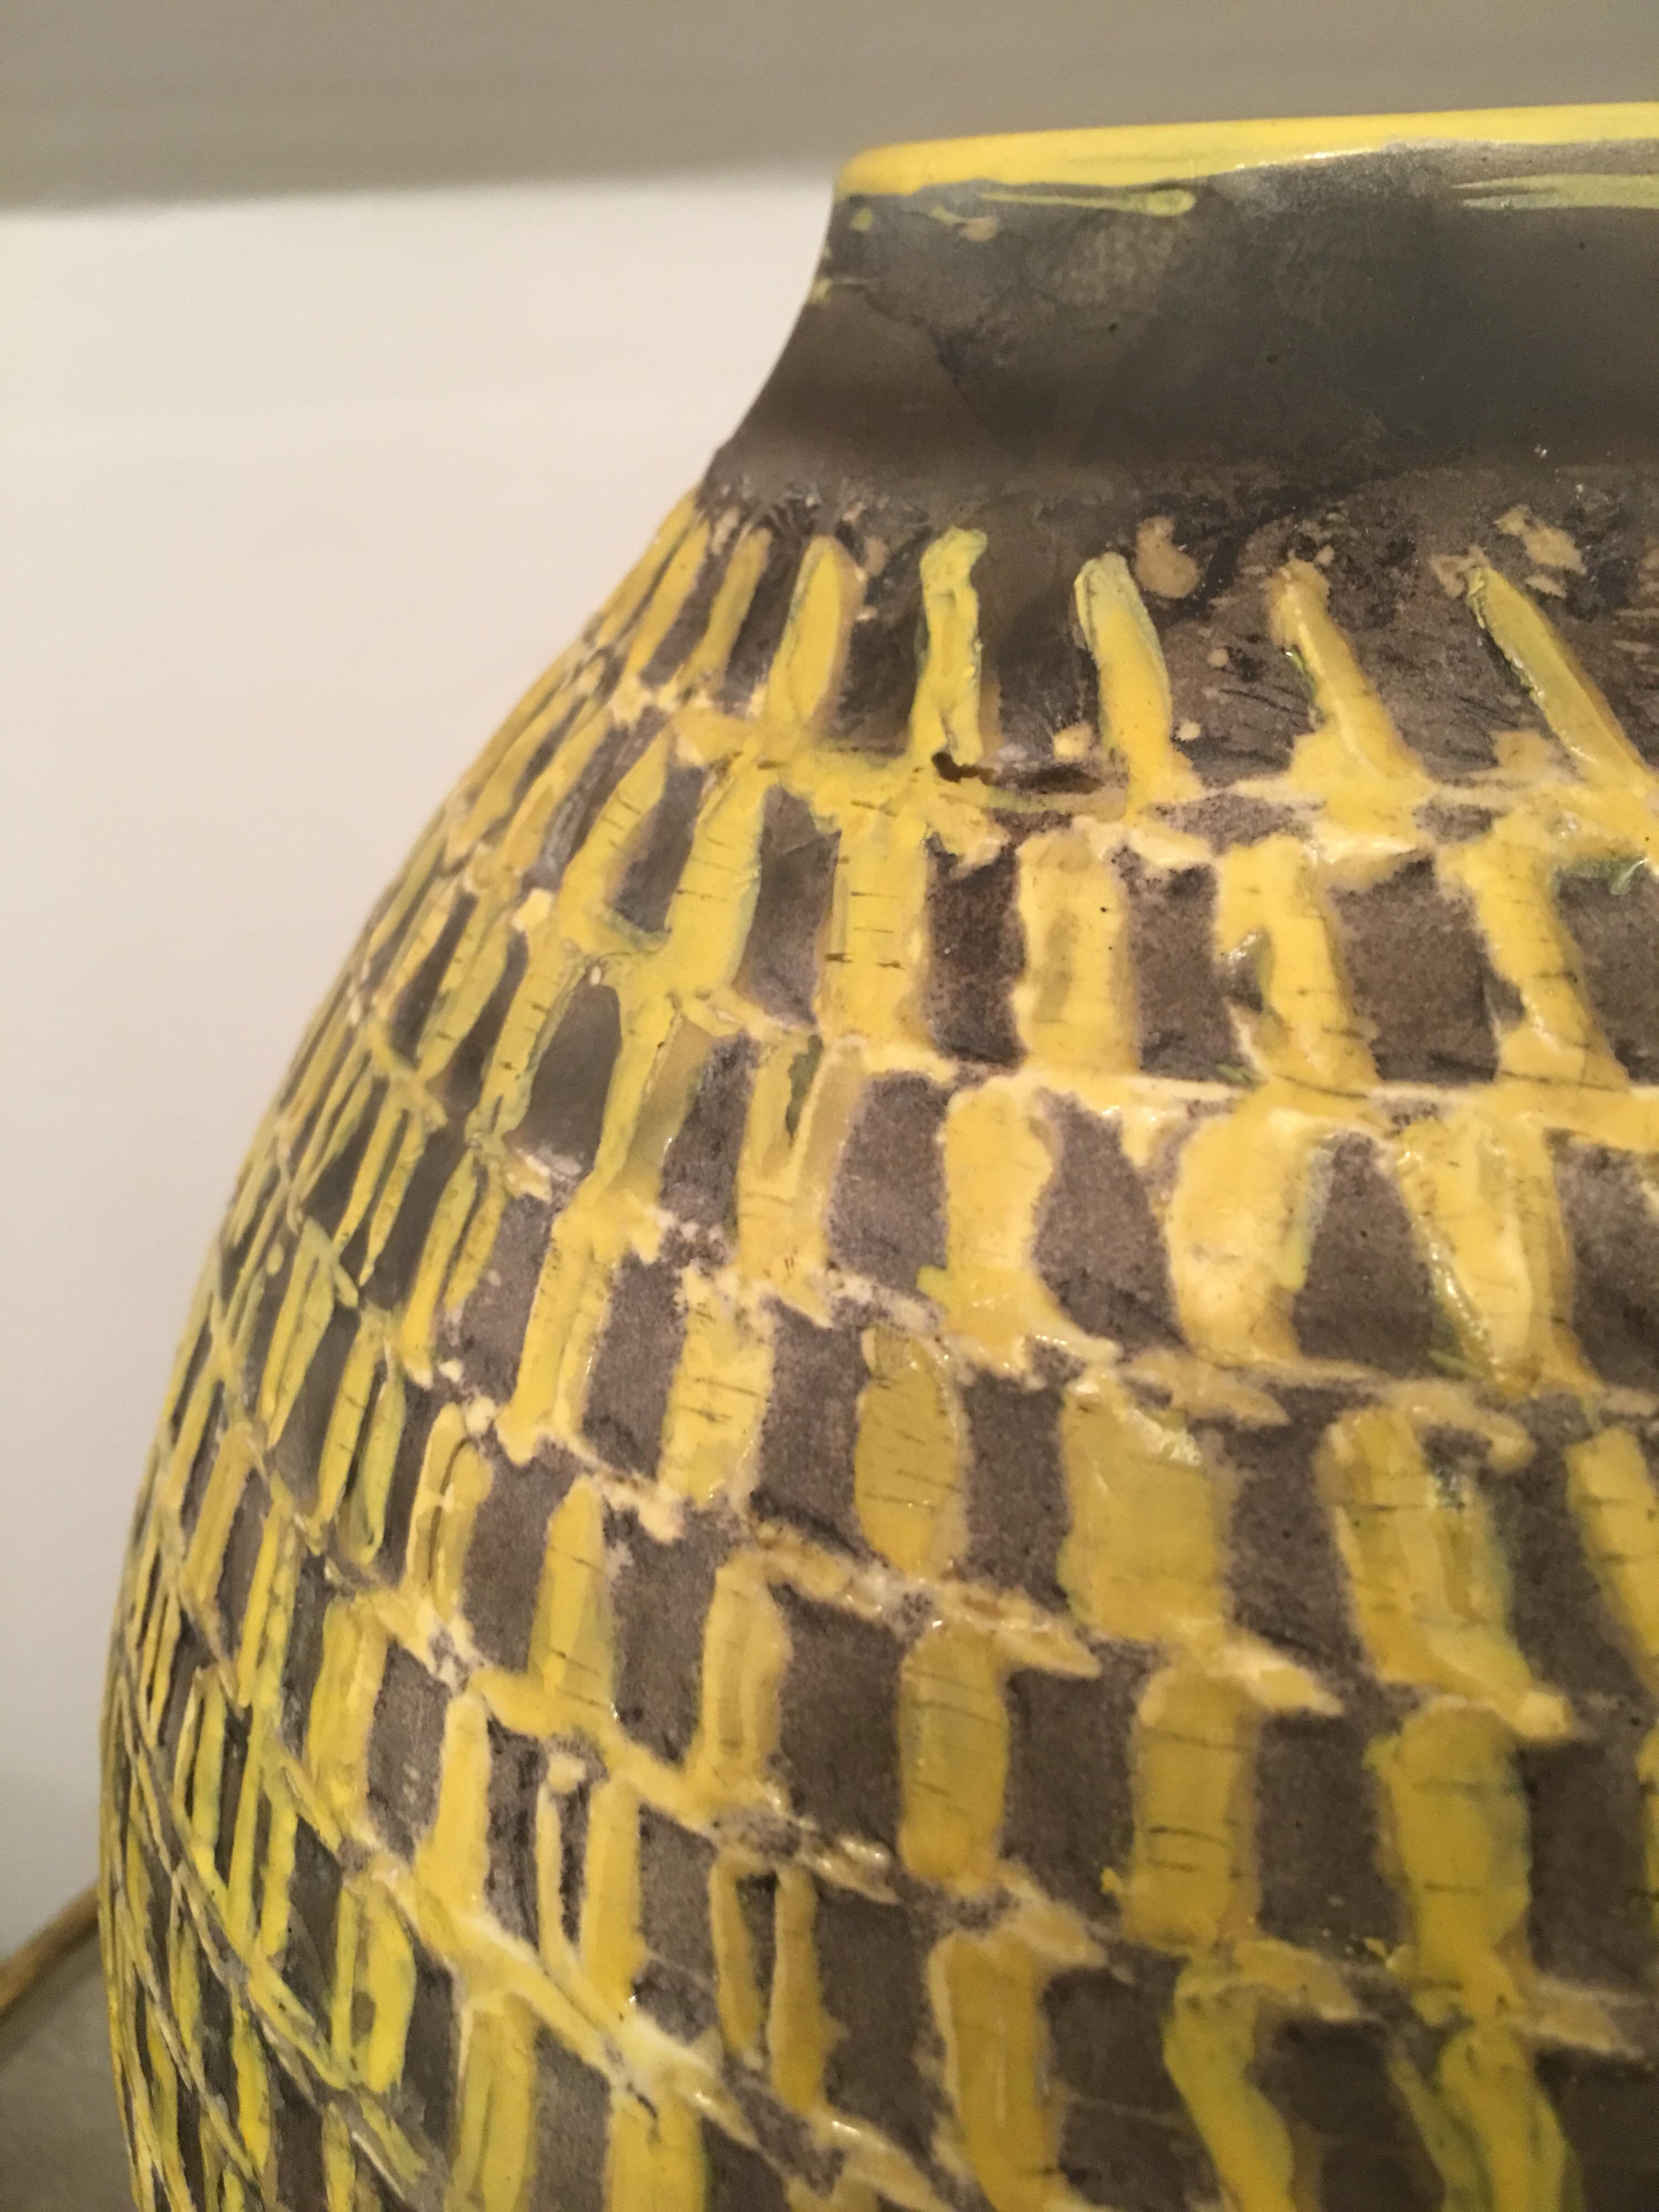 Jean Besnard Signed Large Yellow Ceramic Vase, Incised Decor, French, 1930s For Sale 3